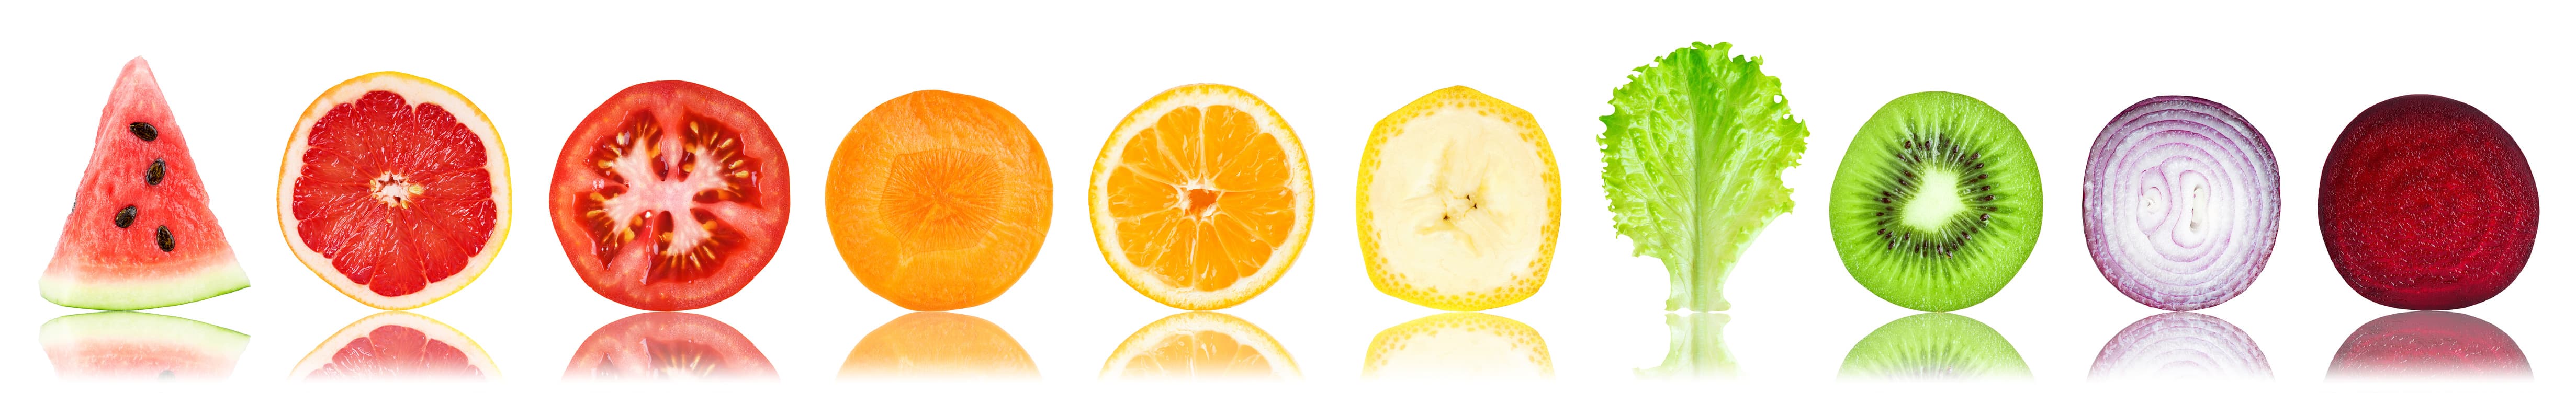 Collection of fresh fruit and vegetable slices on white background